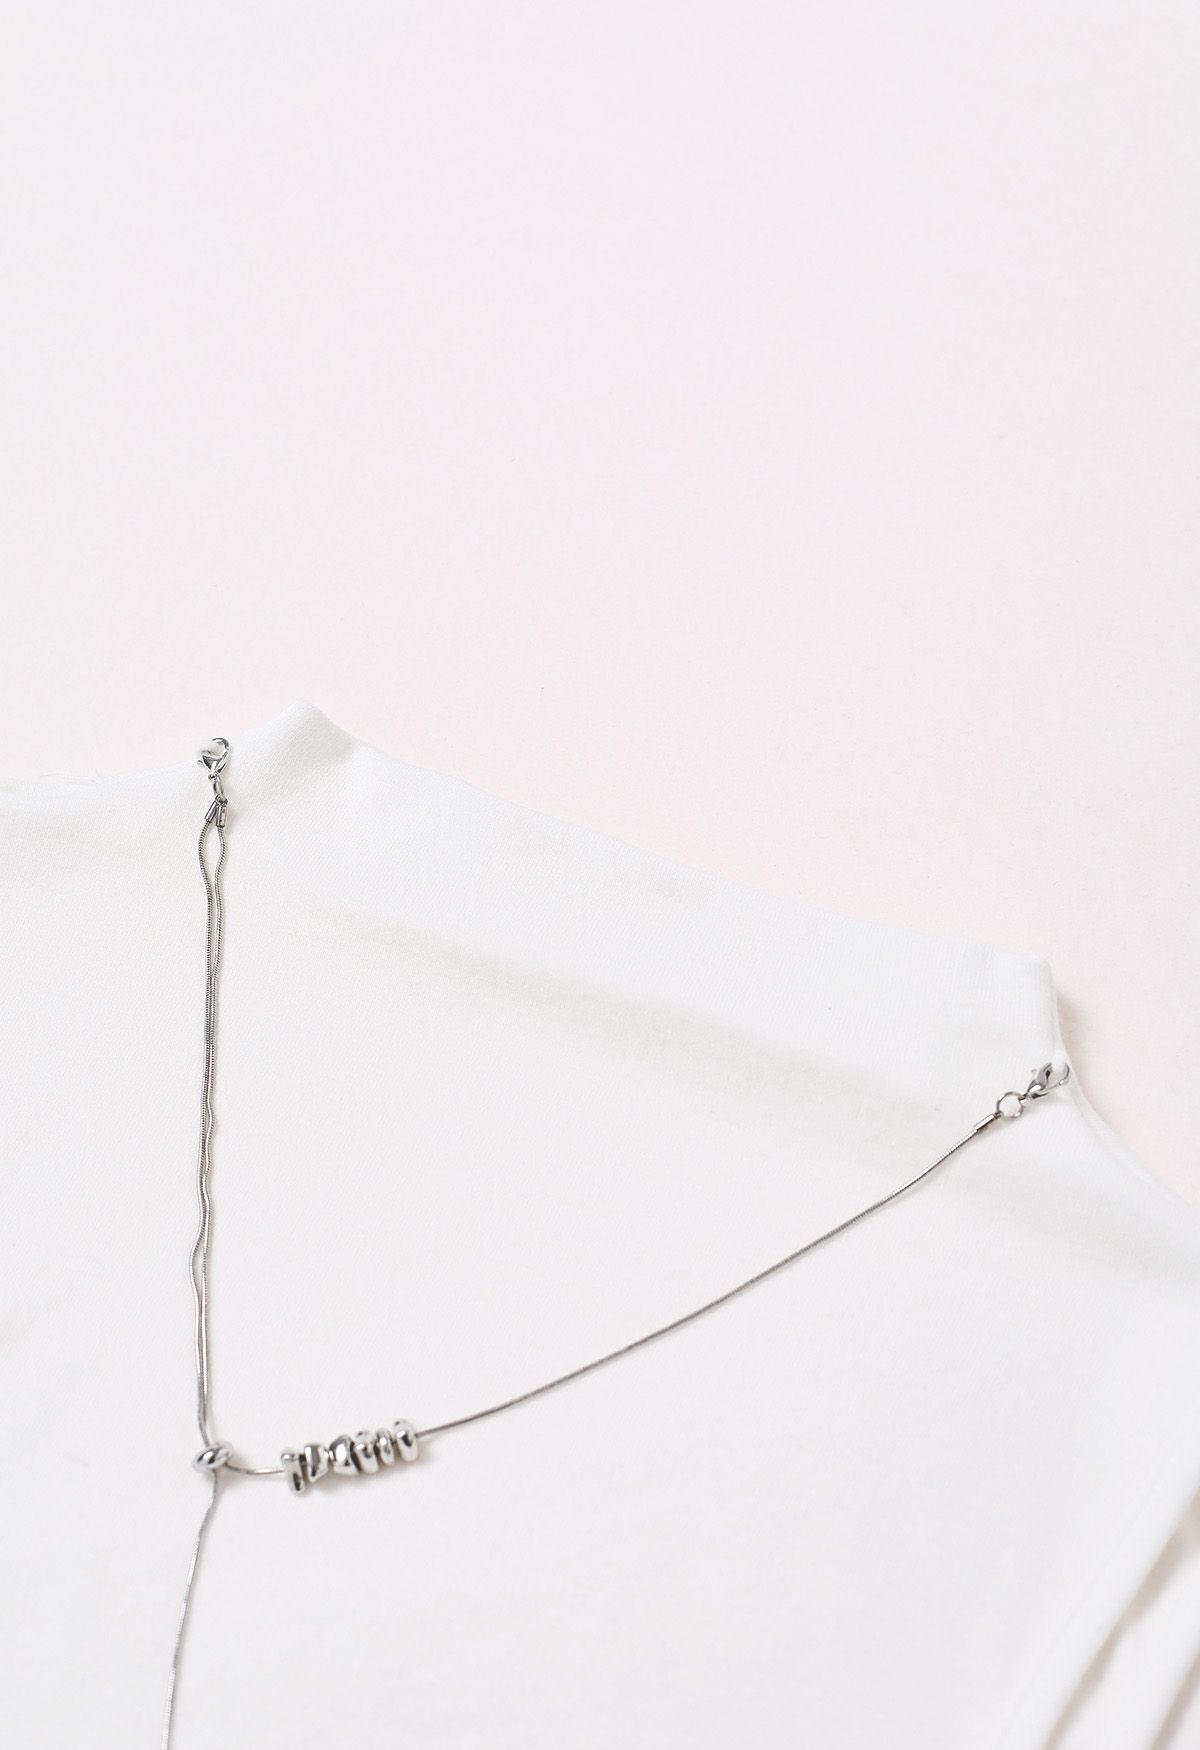 Detachable Necklace Adorned Asymmetric Sleeveless Top in White